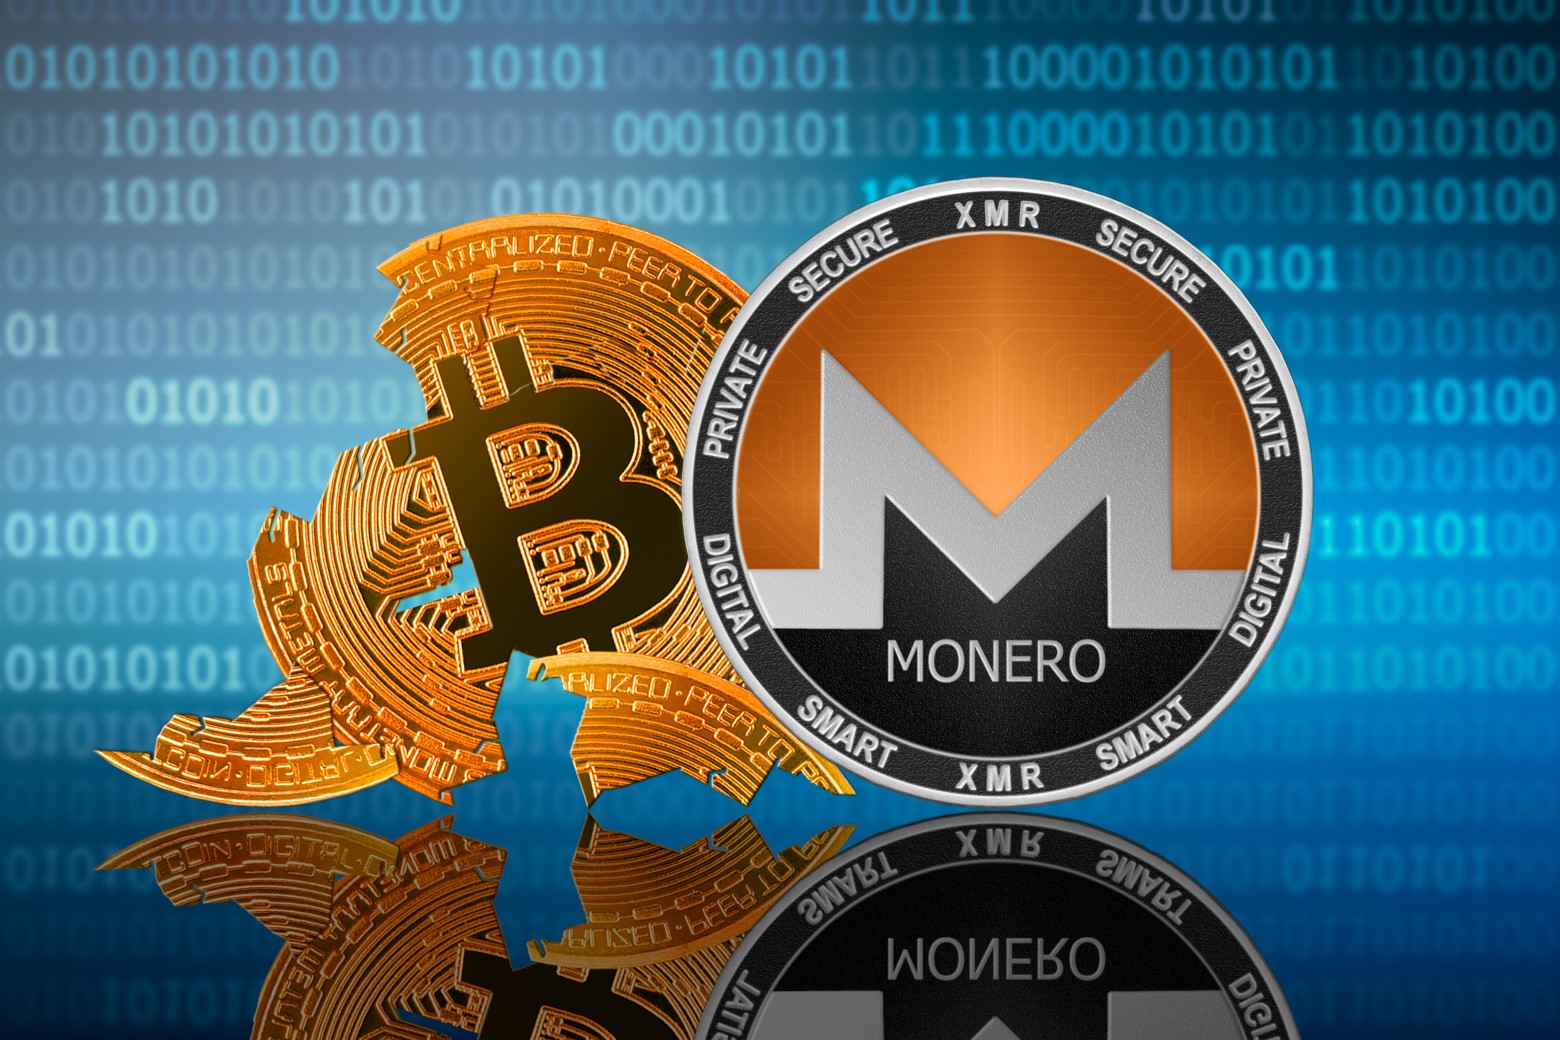 How Monero works and how it differs from Bitcoin? – CryptoMode